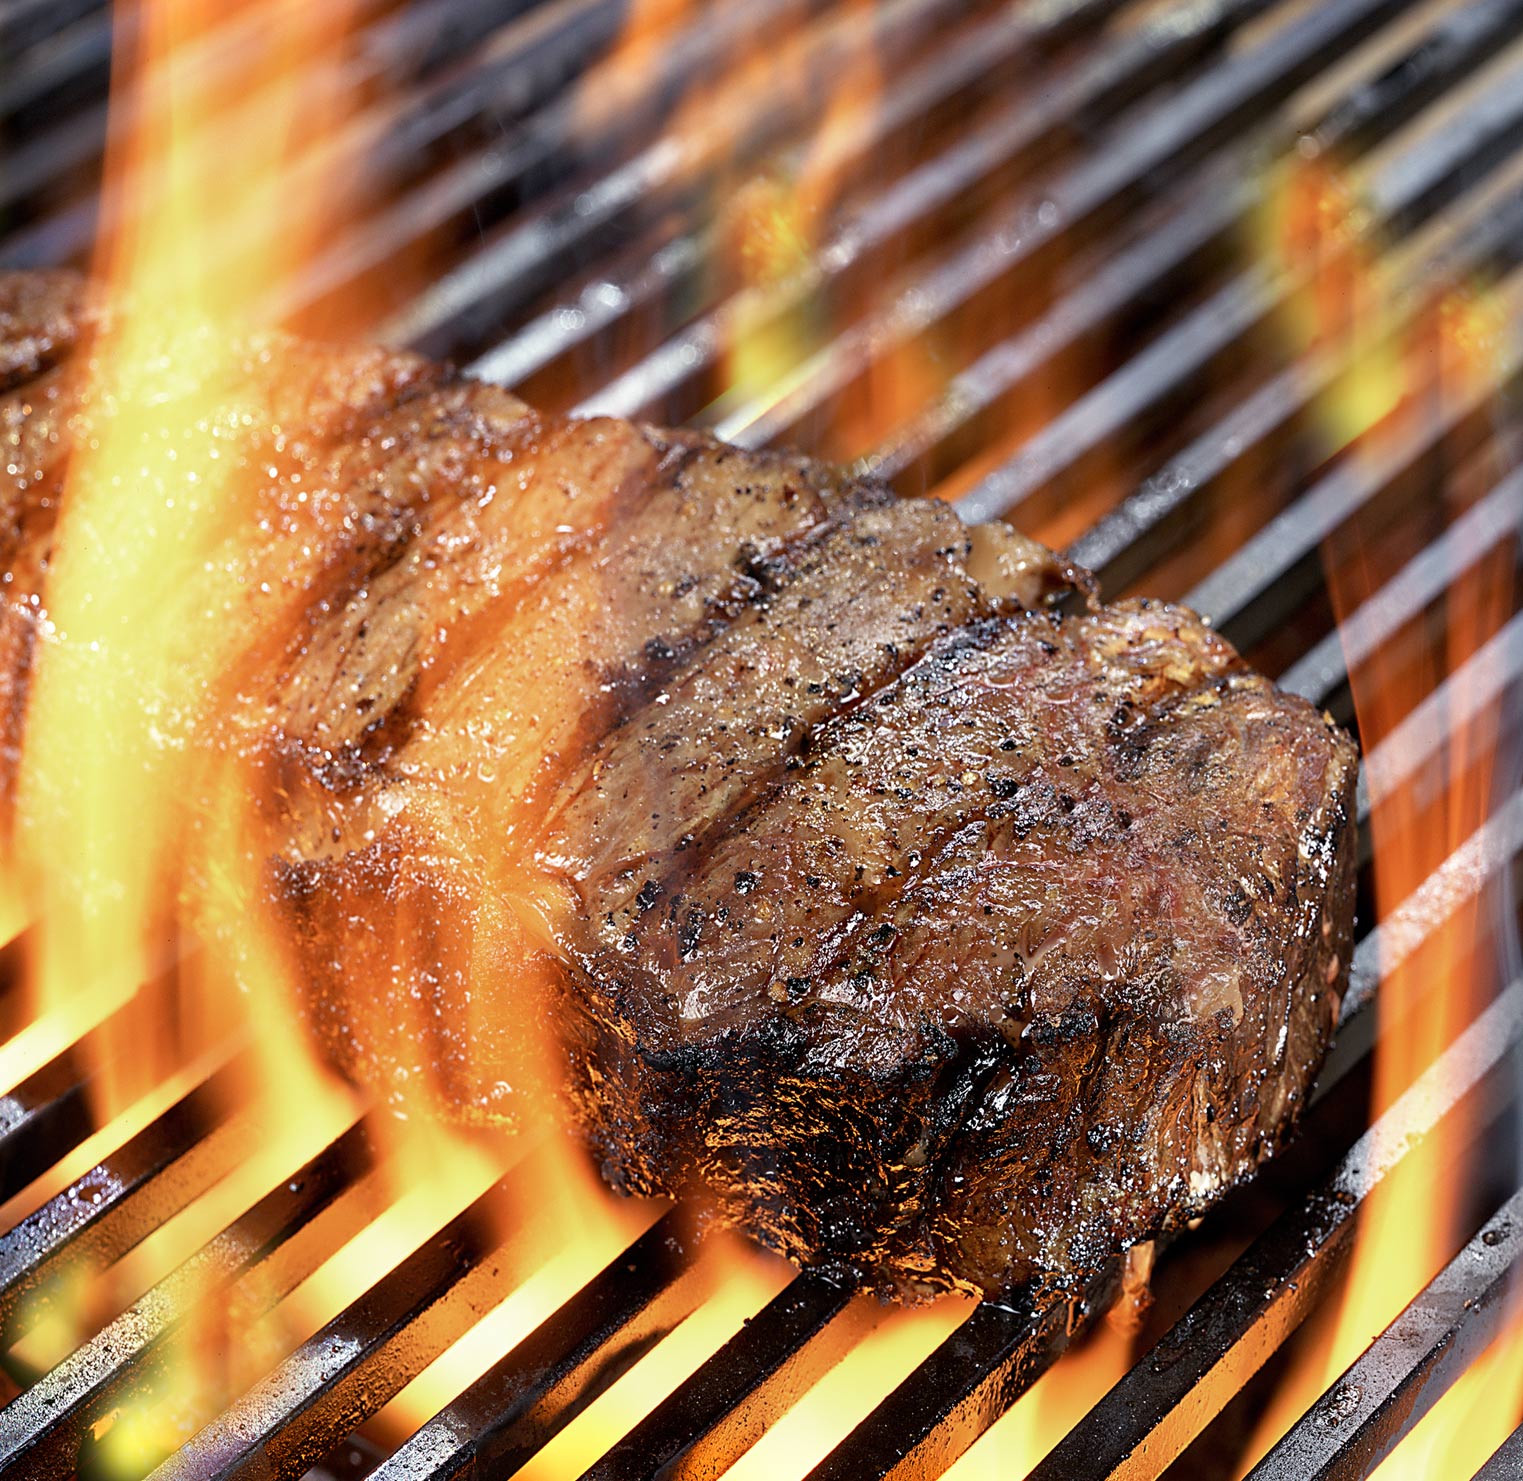 Glasshouse Assignment - David Bishop - Food Photography - Flaming London Broil